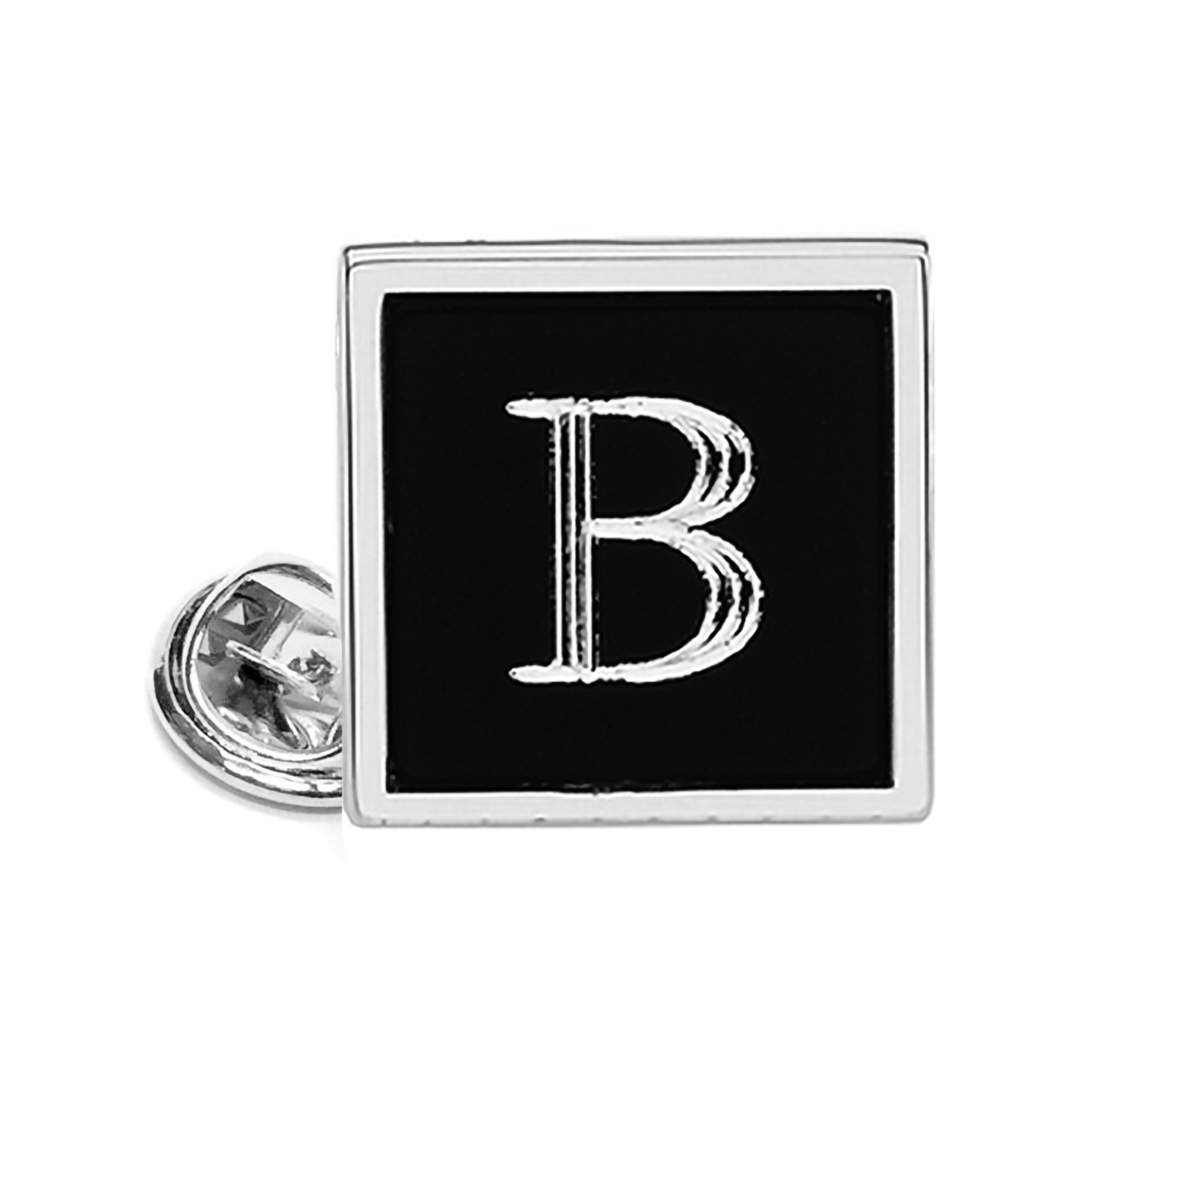 Personalized Initial Name Lapel Pin Cufflinks Tie Bar Silver